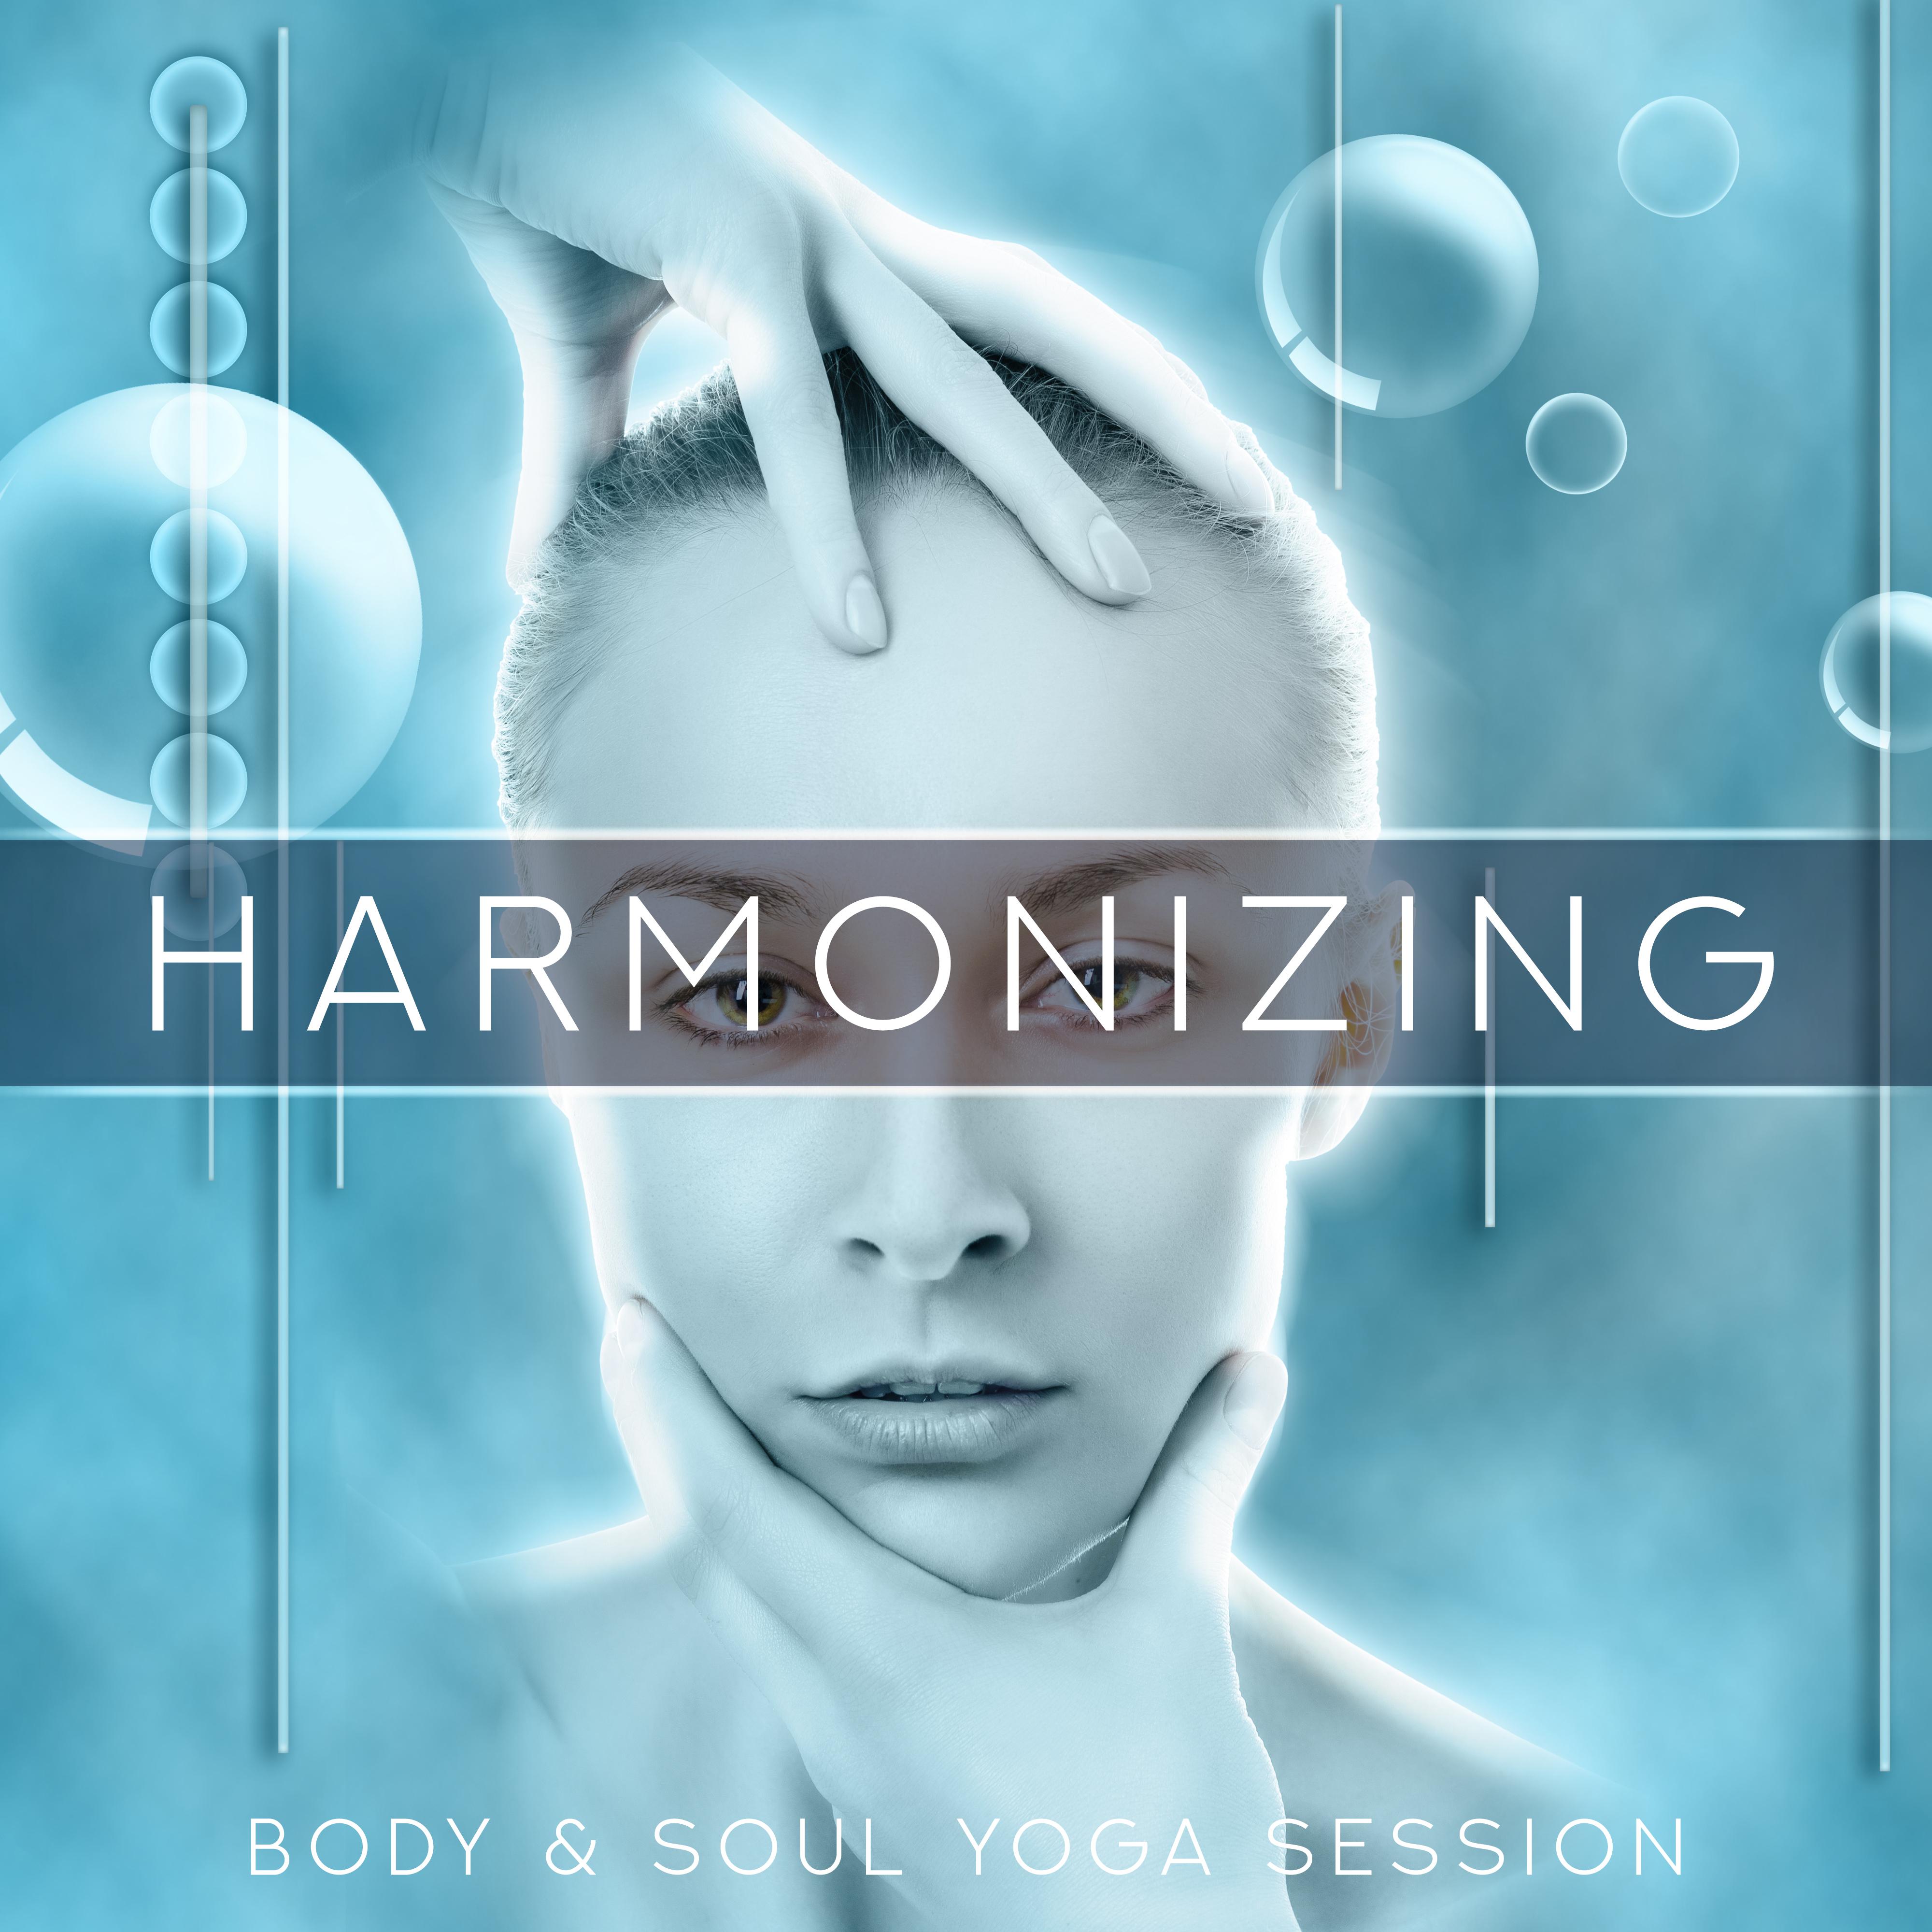 Harmonizing Body & Soul Yoga Session: New Age Ambient 2019 Music for Meditation & Relaxation, Mantra Zen, Vital Energy Increase, Inner Healing